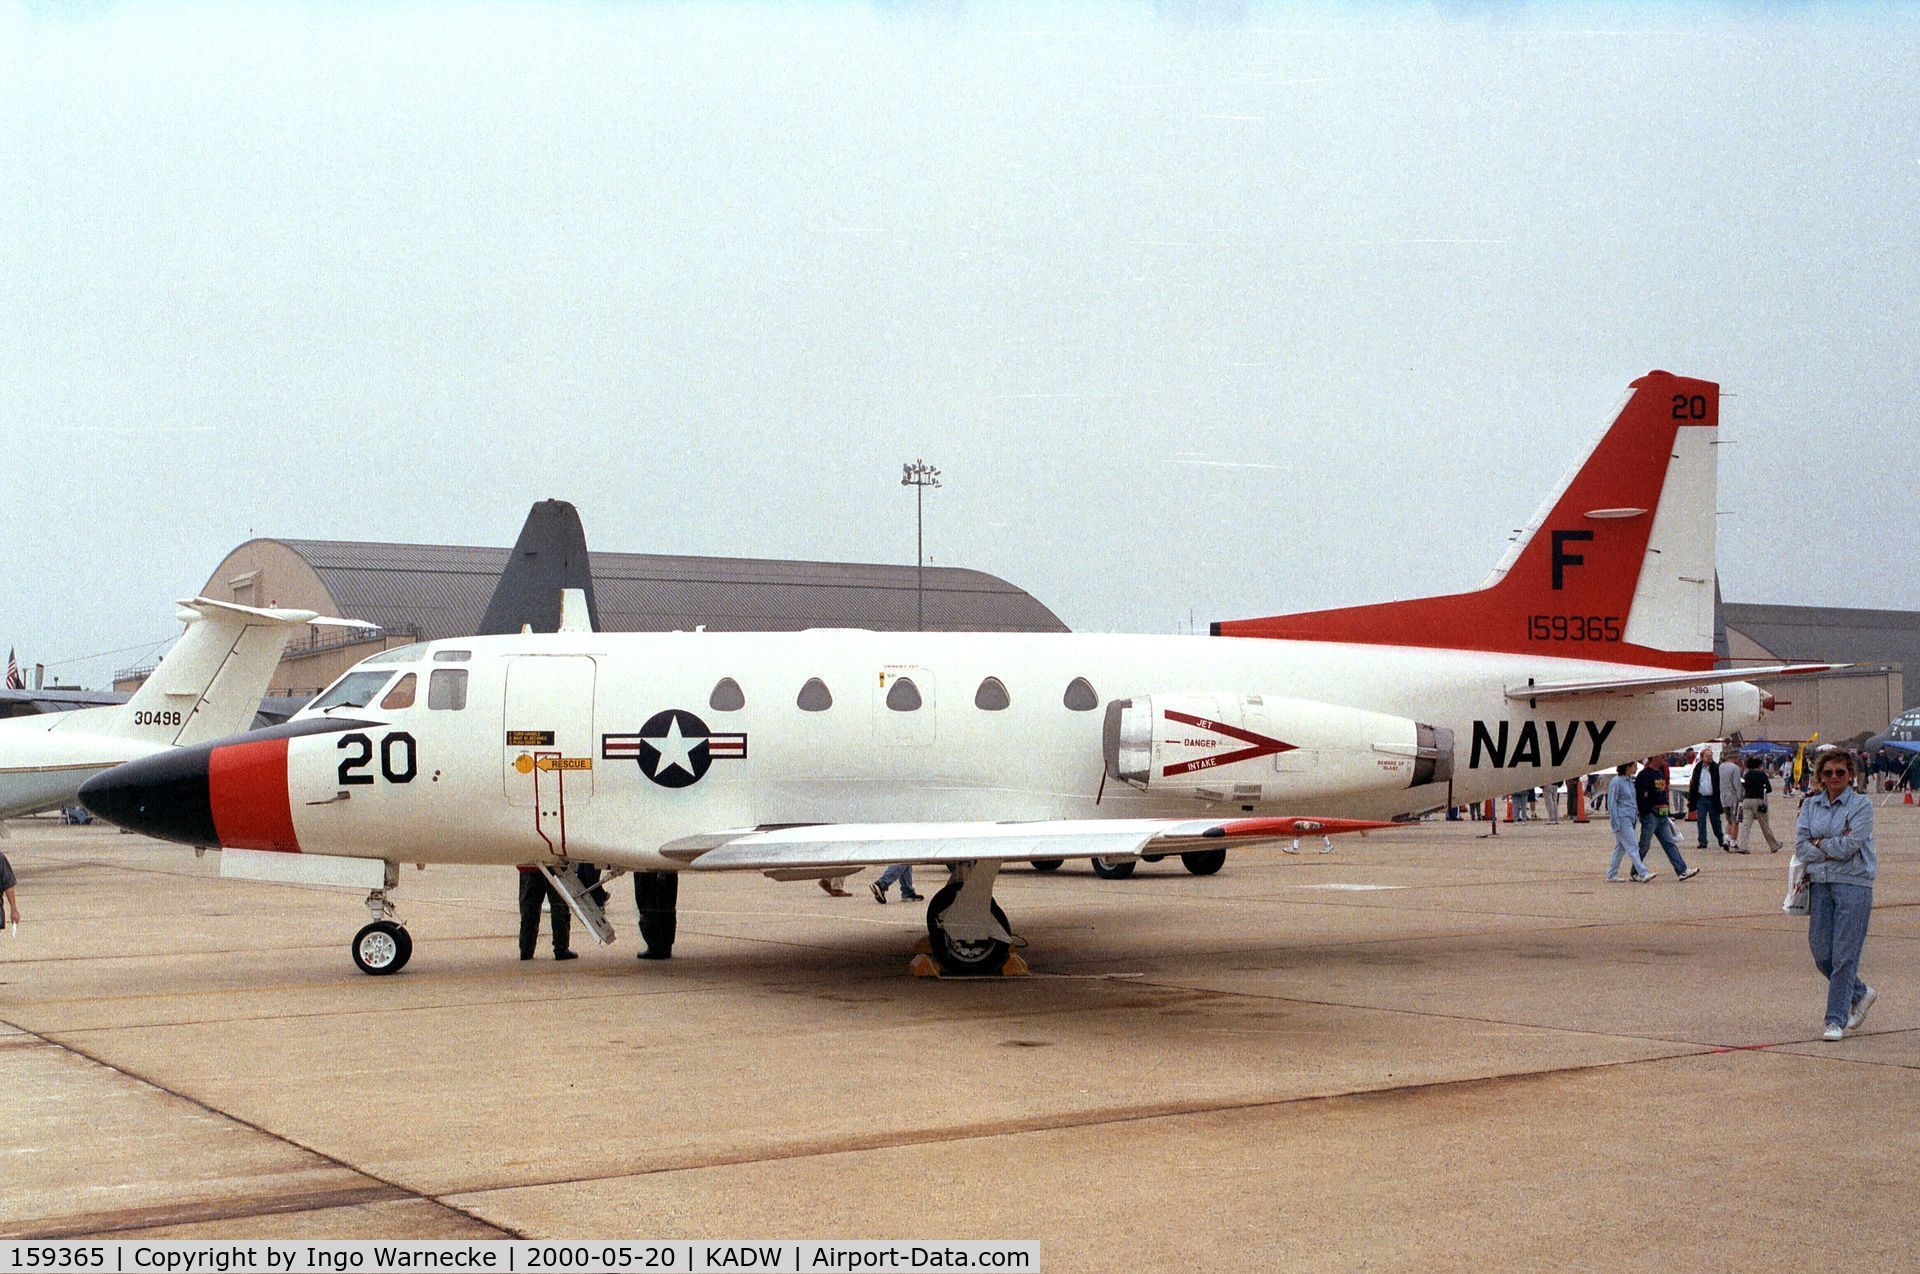 159365, North American Rockwell CT-39G Sabreliner C/N 306-70, North American Rockwell CT-39G Sabreliner of the US Navy at Andrews AFB during Armed Forces Day